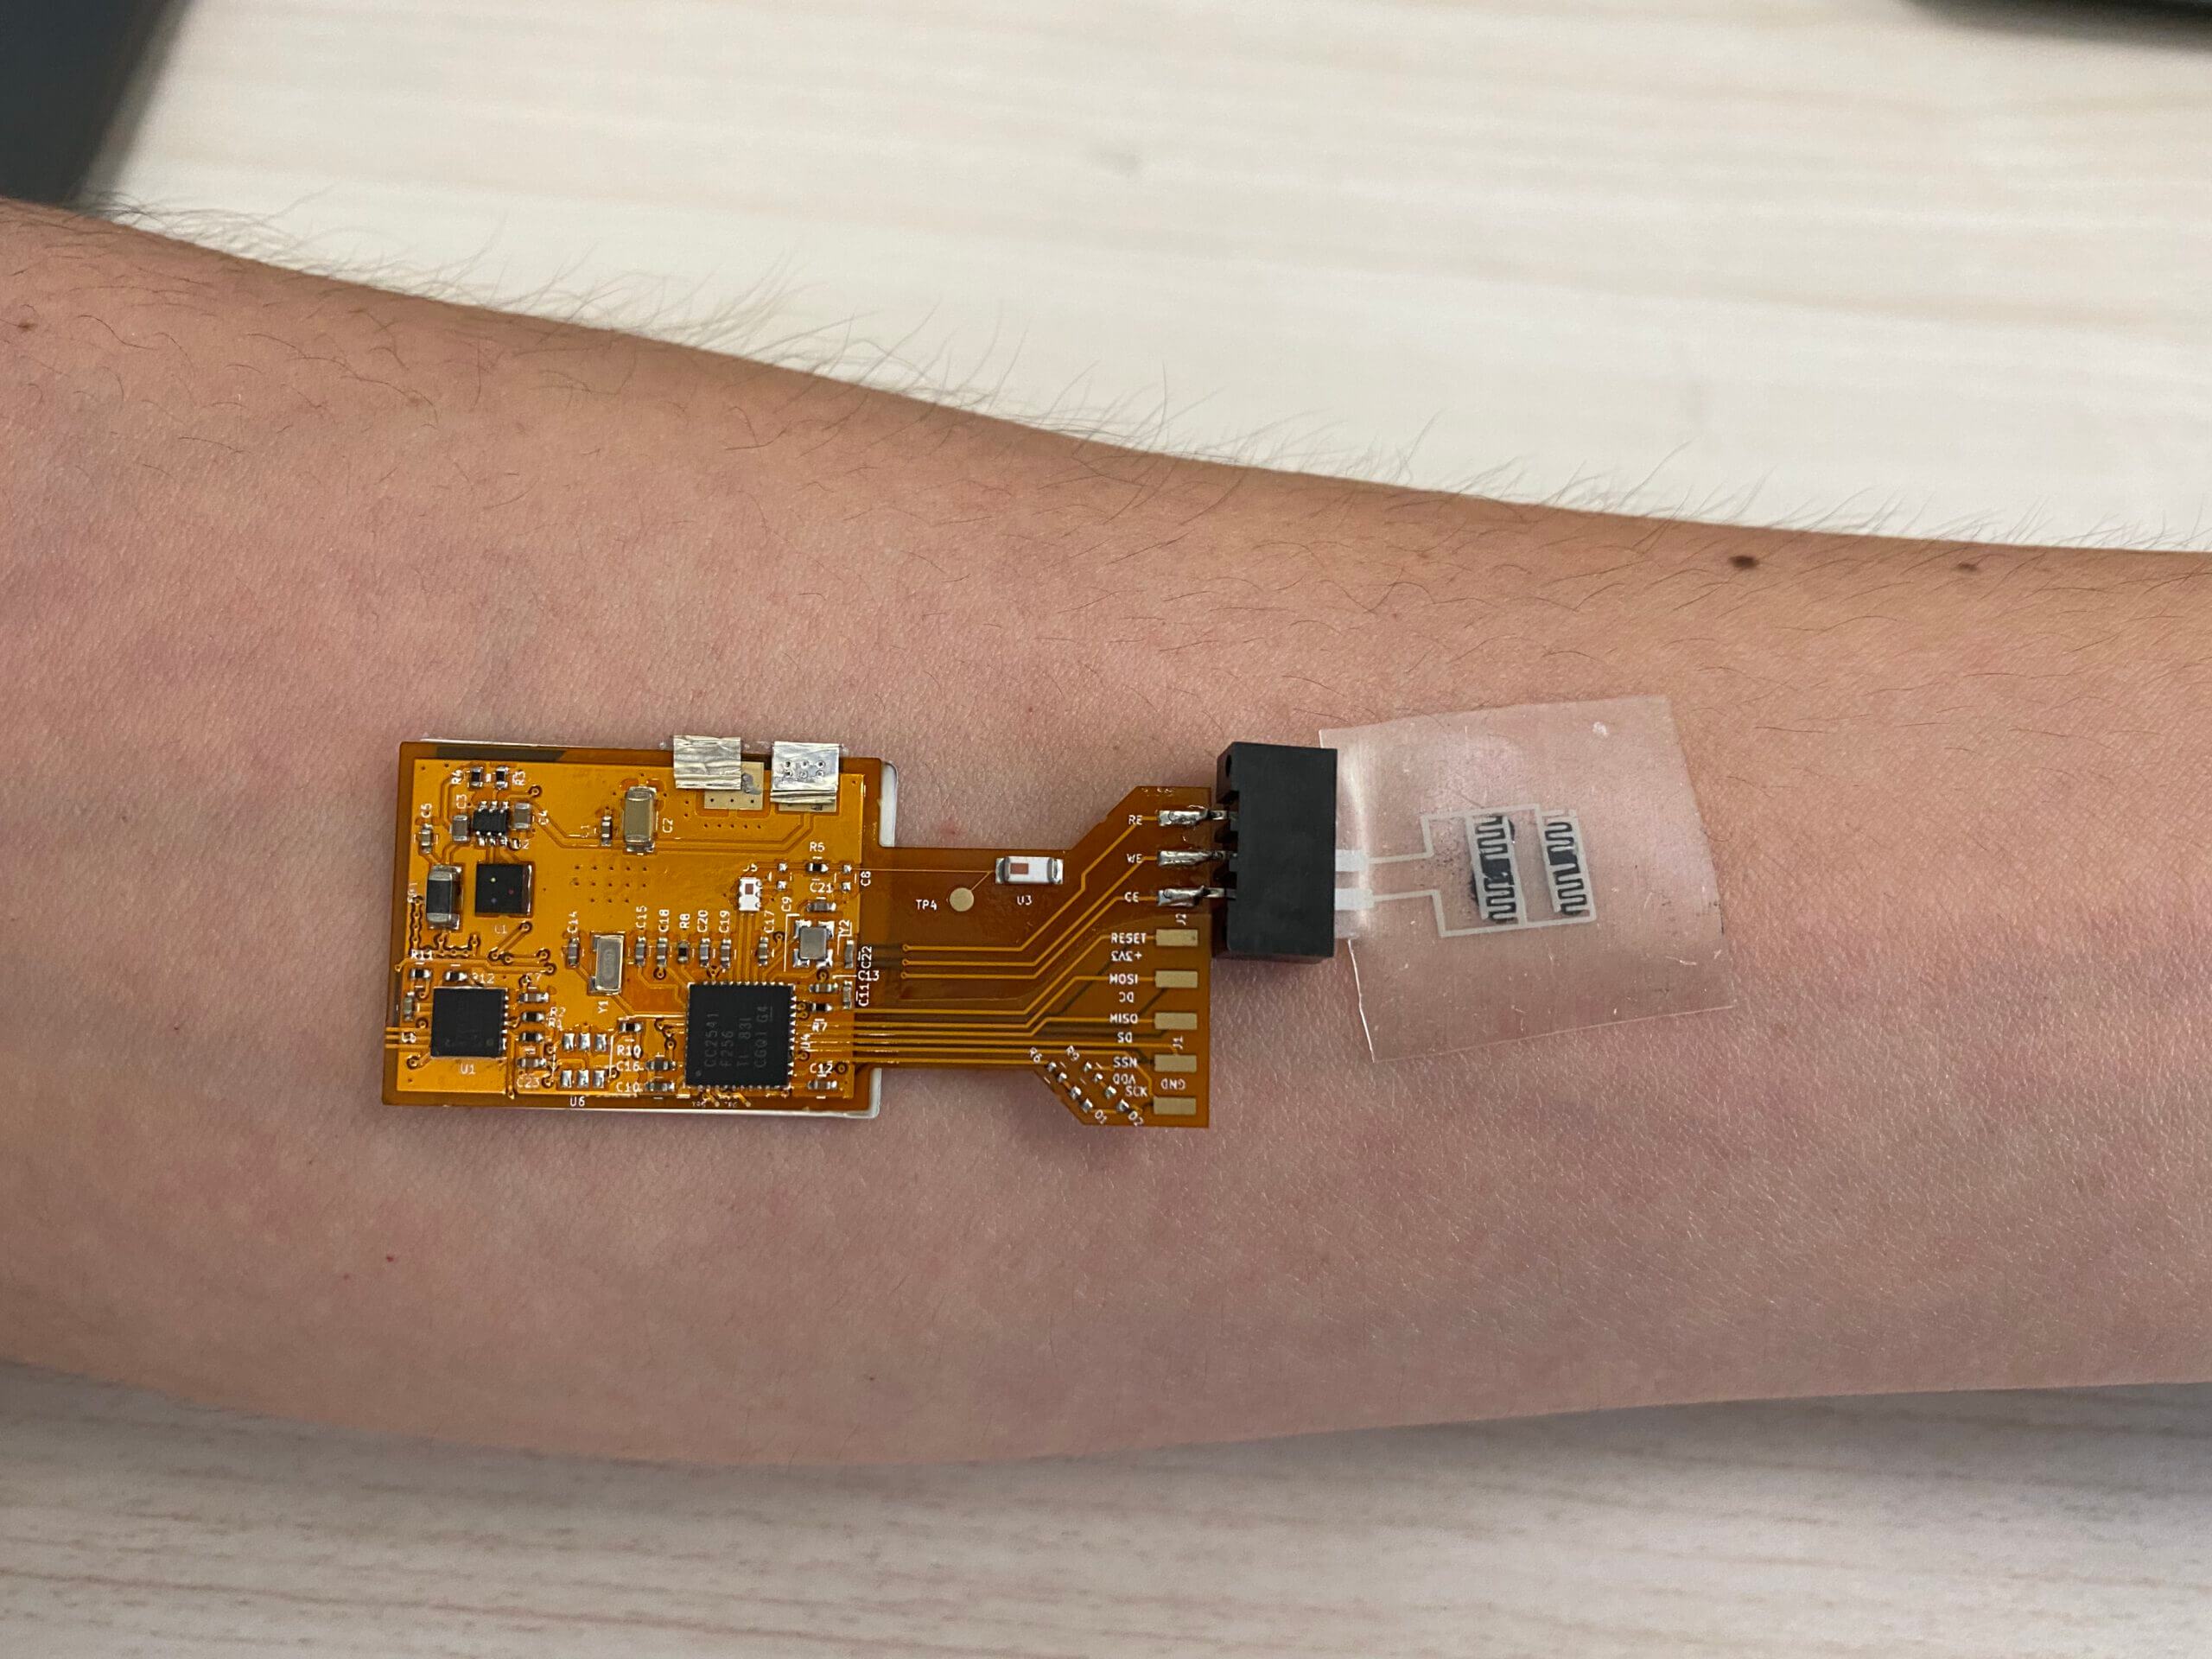 Tuberculosis monitoring using a sticker that sticks to the skin and measures the volatile particles emitted from it. Credit: Technion barges